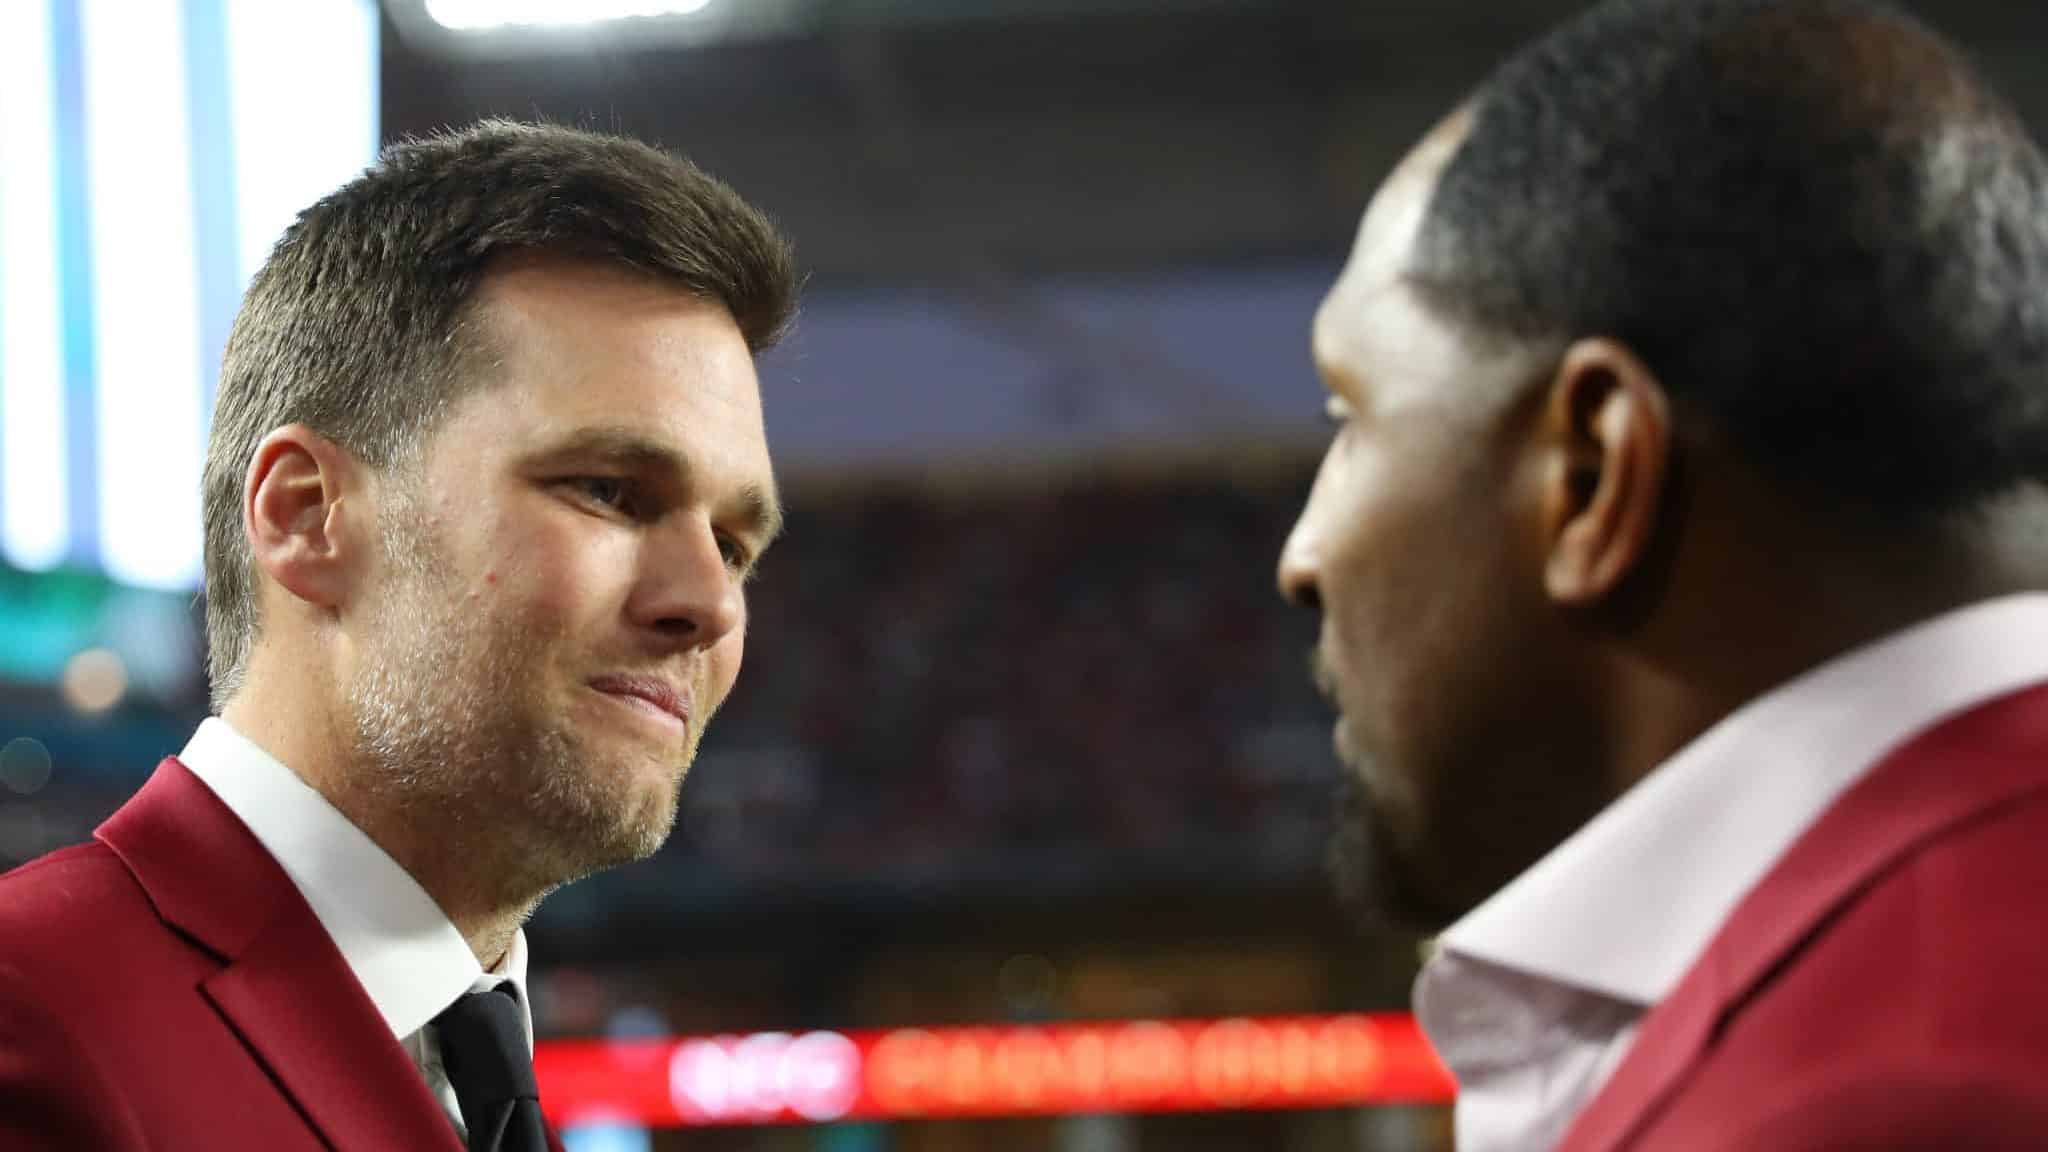 MIAMI, FLORIDA - FEBRUARY 02: Tom Brady of the New England Patriots talks with NFL Hall of Famer Ray Lewis of the Baltimore Ravens prior to Super Bowl LIV between the San Francisco 49ers and the Kansas City Chiefs at Hard Rock Stadium on February 02, 2020 in Miami, Florida.